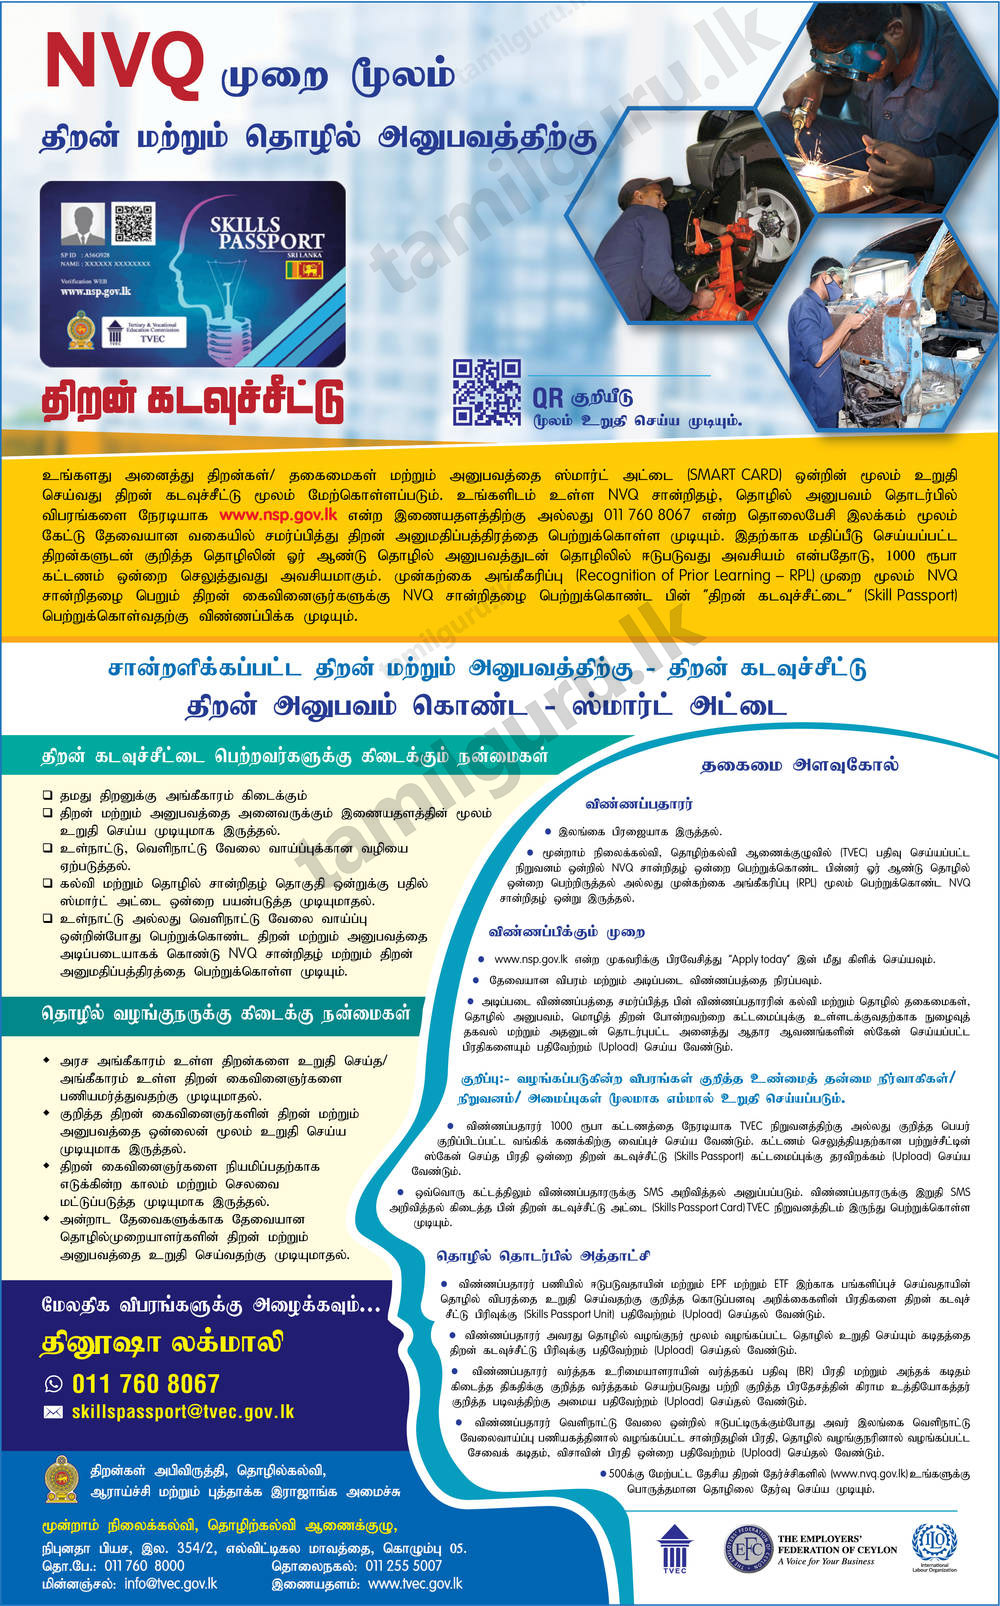 Skills Passport for migrant workers or workers in Sri Lanka who have NVQ Qualifications - Full Details in Tamil